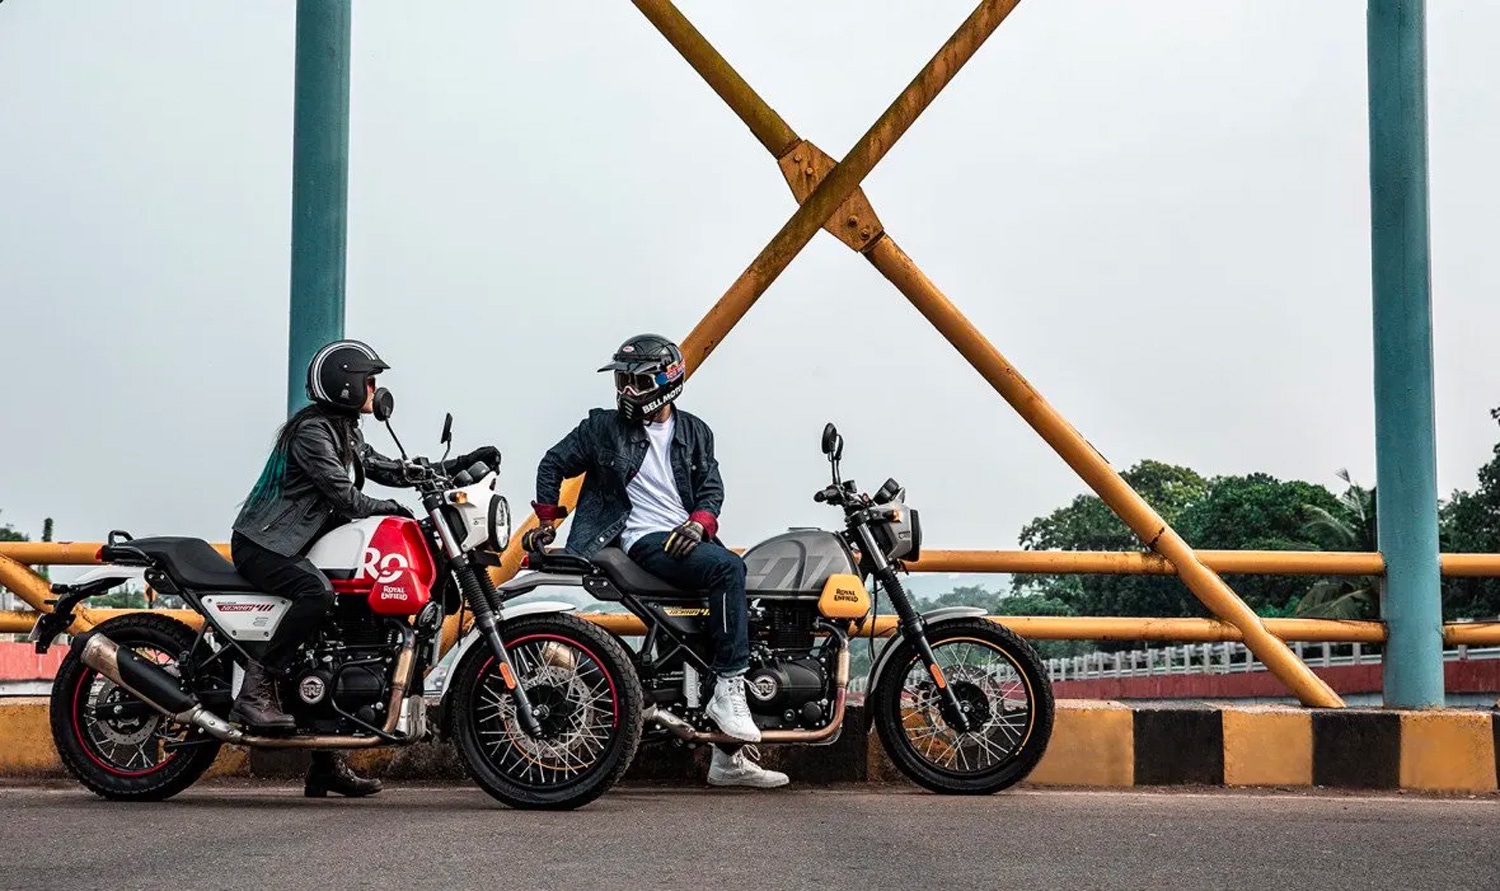 Two 2022 Royal Enfield Scram 411 motorcycles on a bridge in India